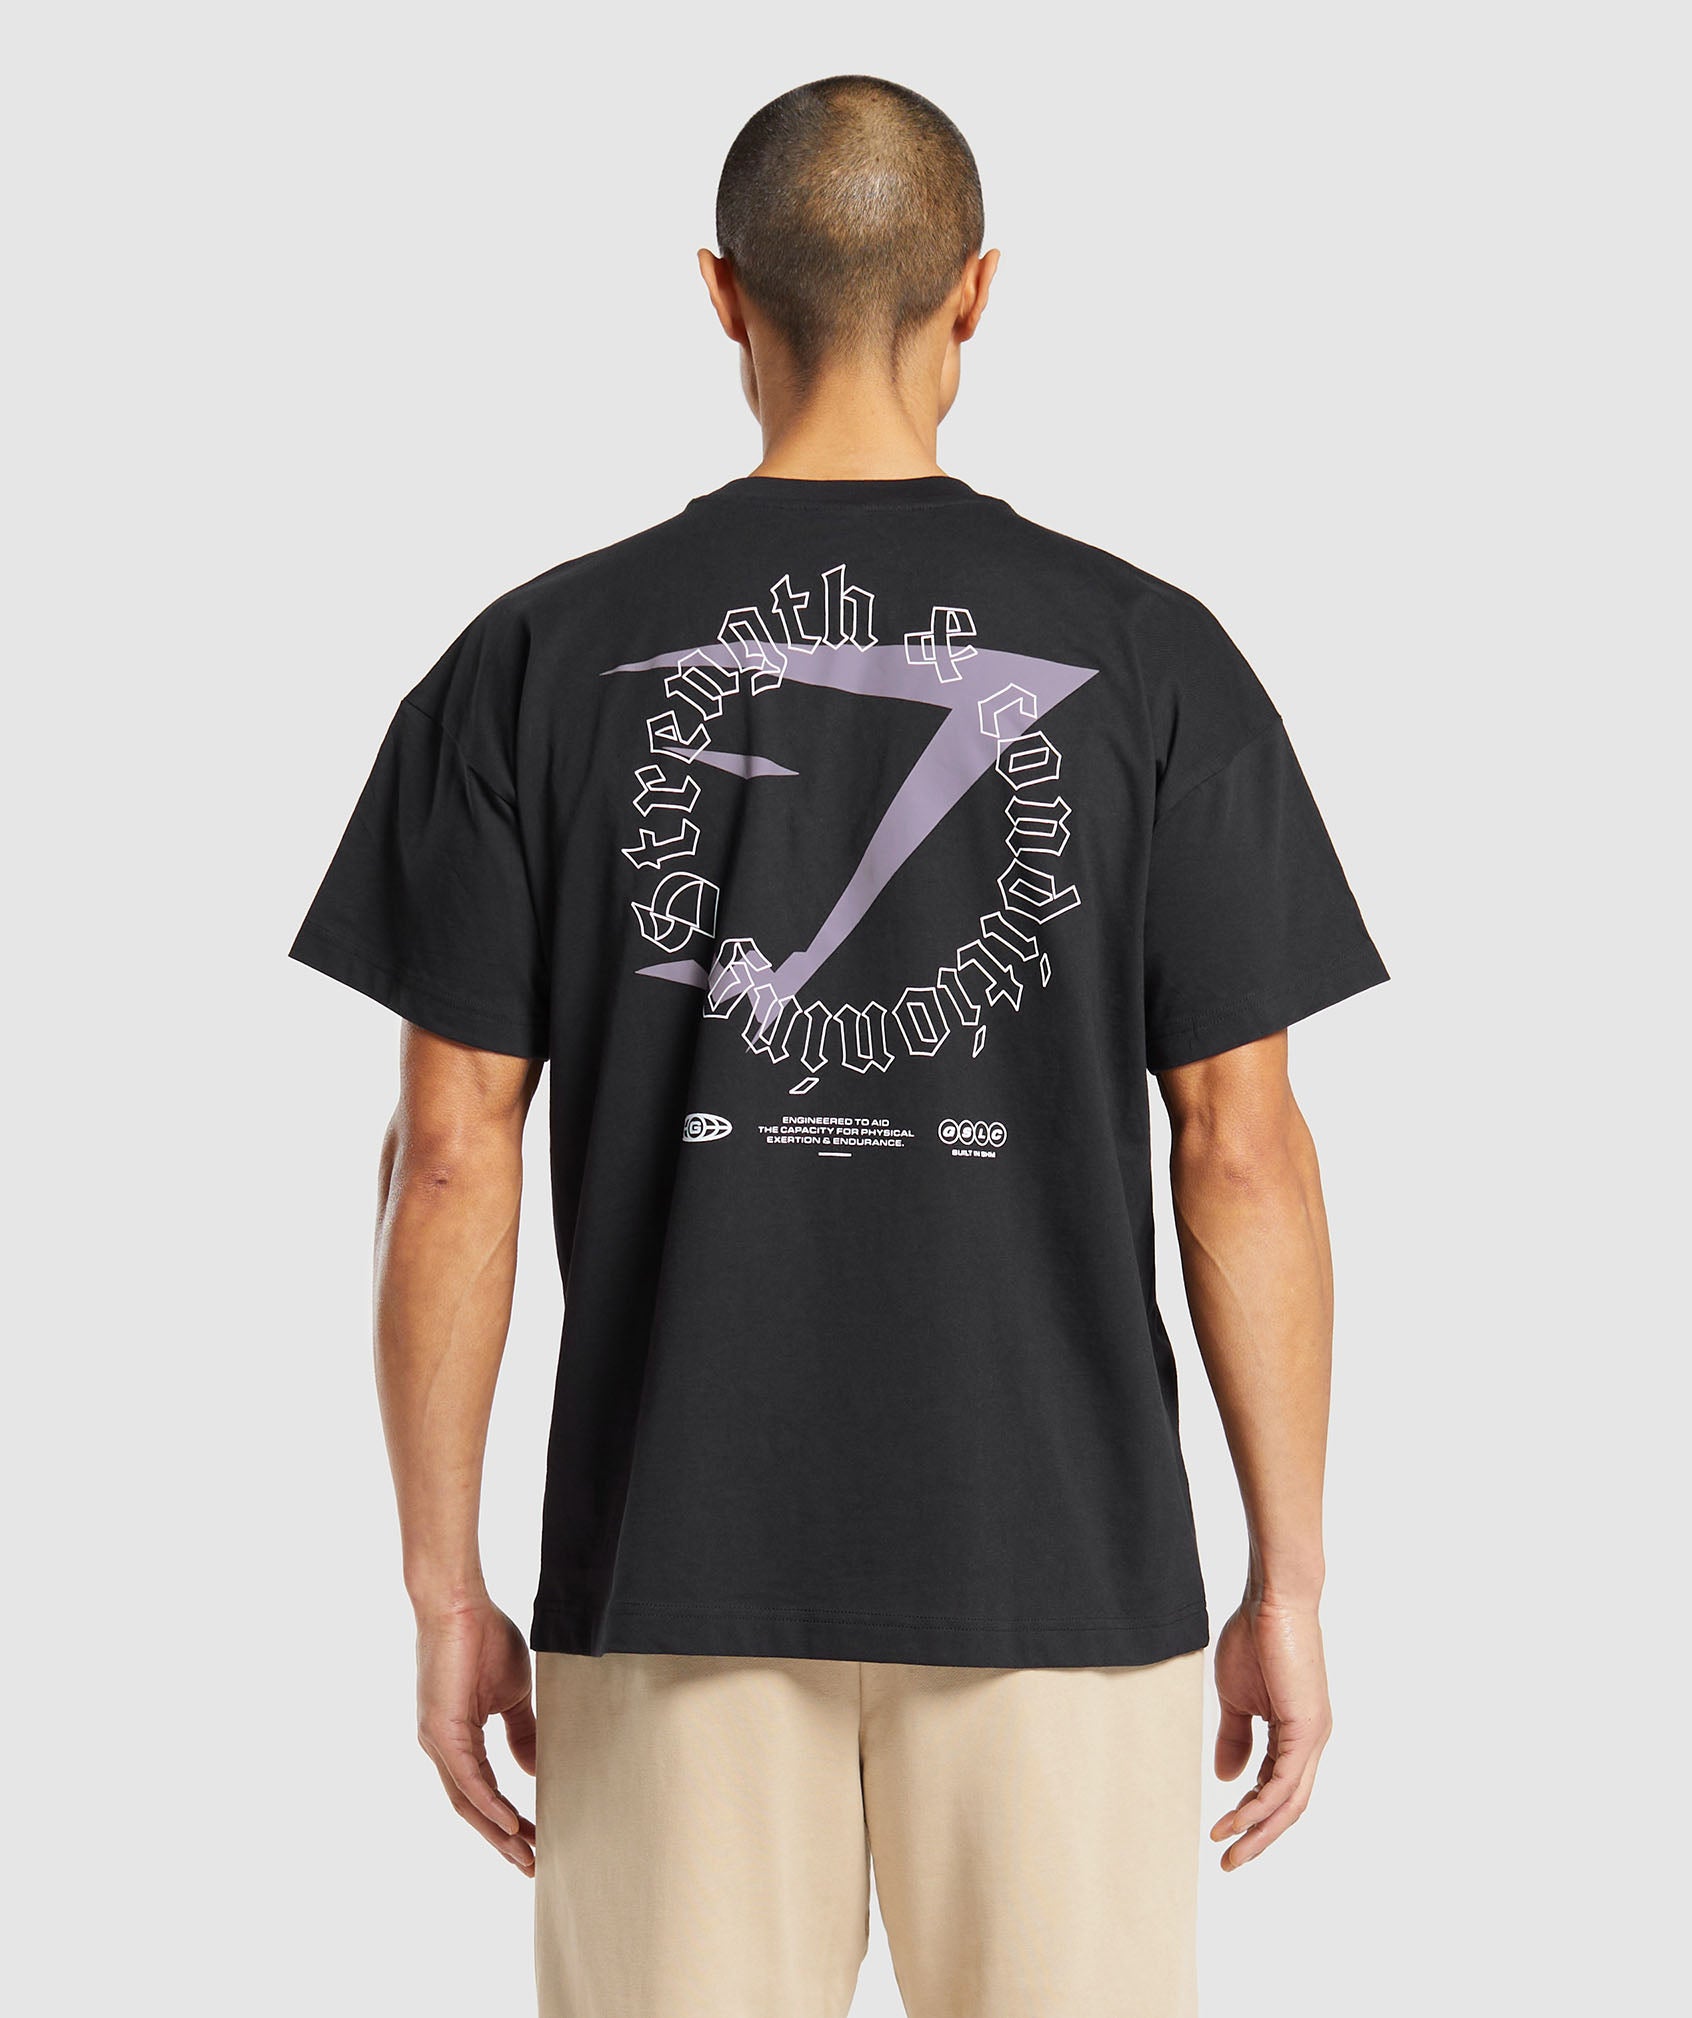 Strength and Conditioning T-Shirt